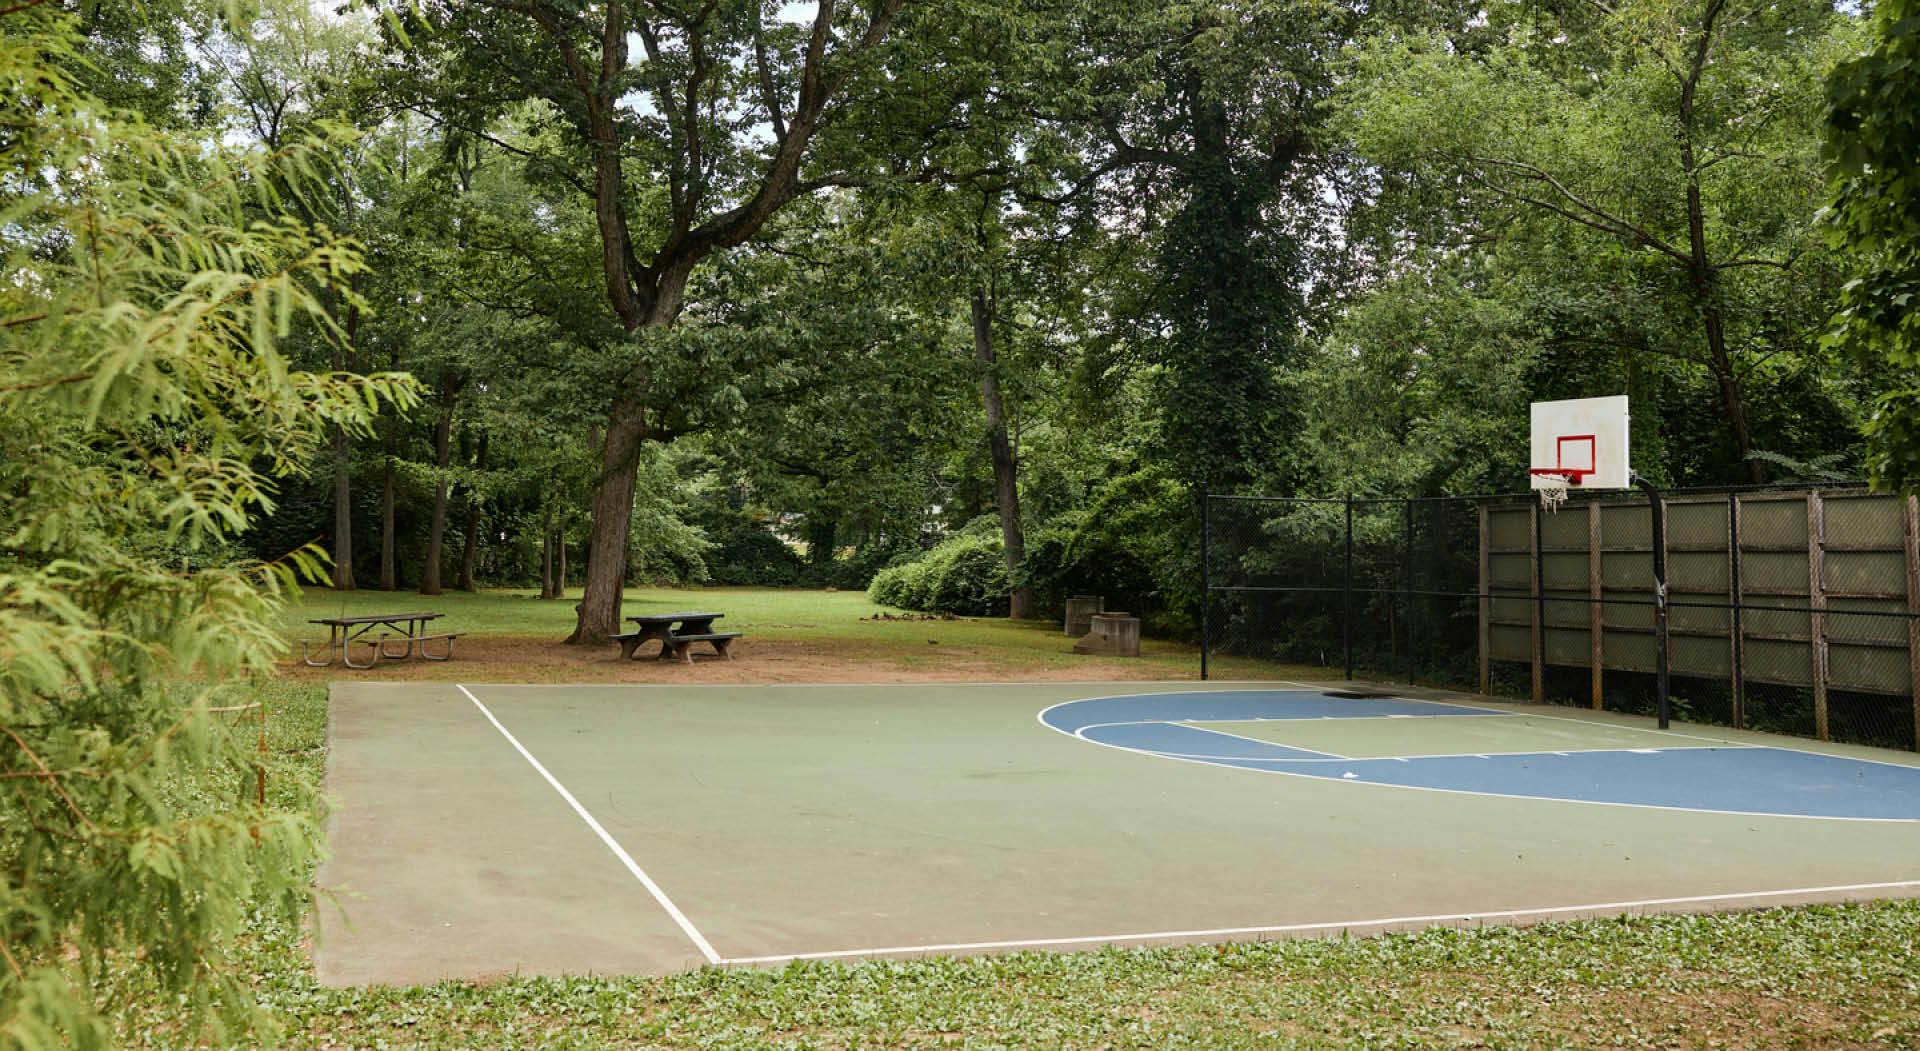 A half-sized basketball court with picnic tables at Perkerson Park. (Photo Credit: Erin Sintos)